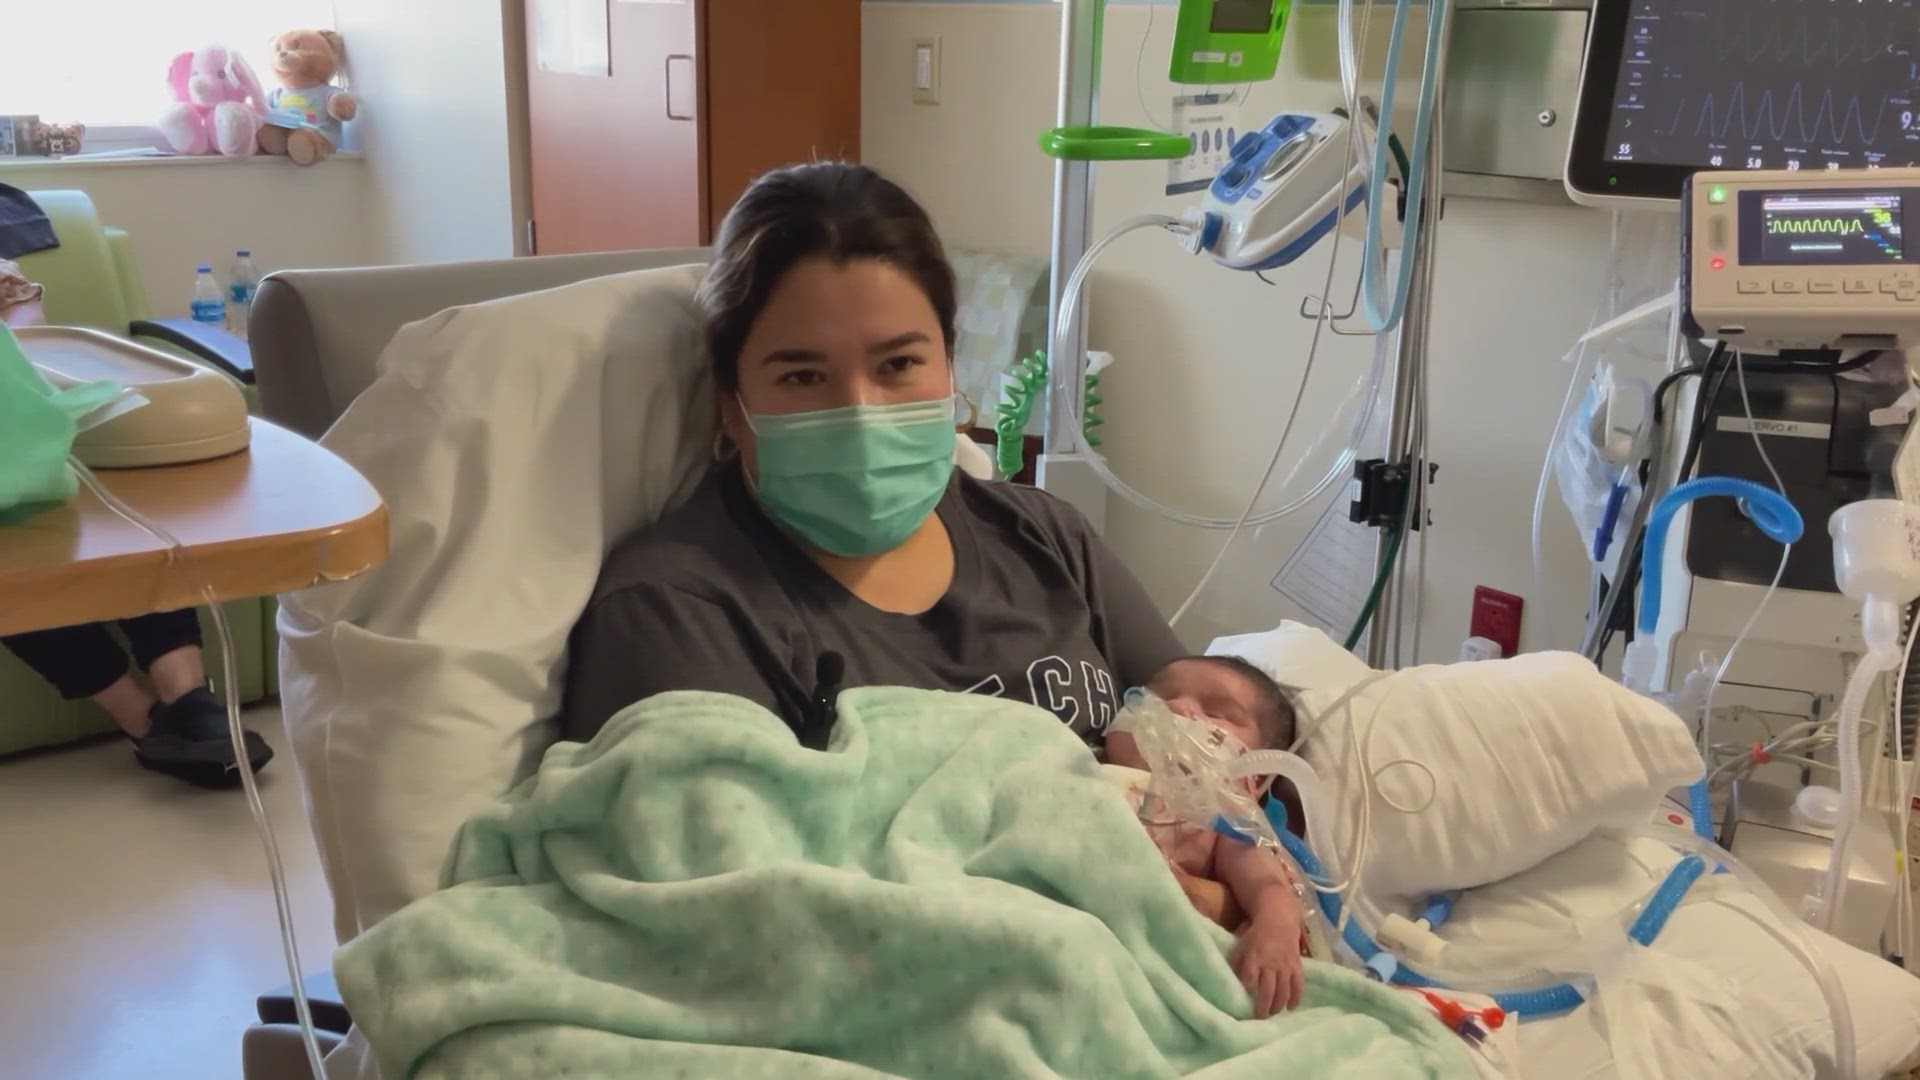 The baby was born with a rare heart condition that requires specialized care.